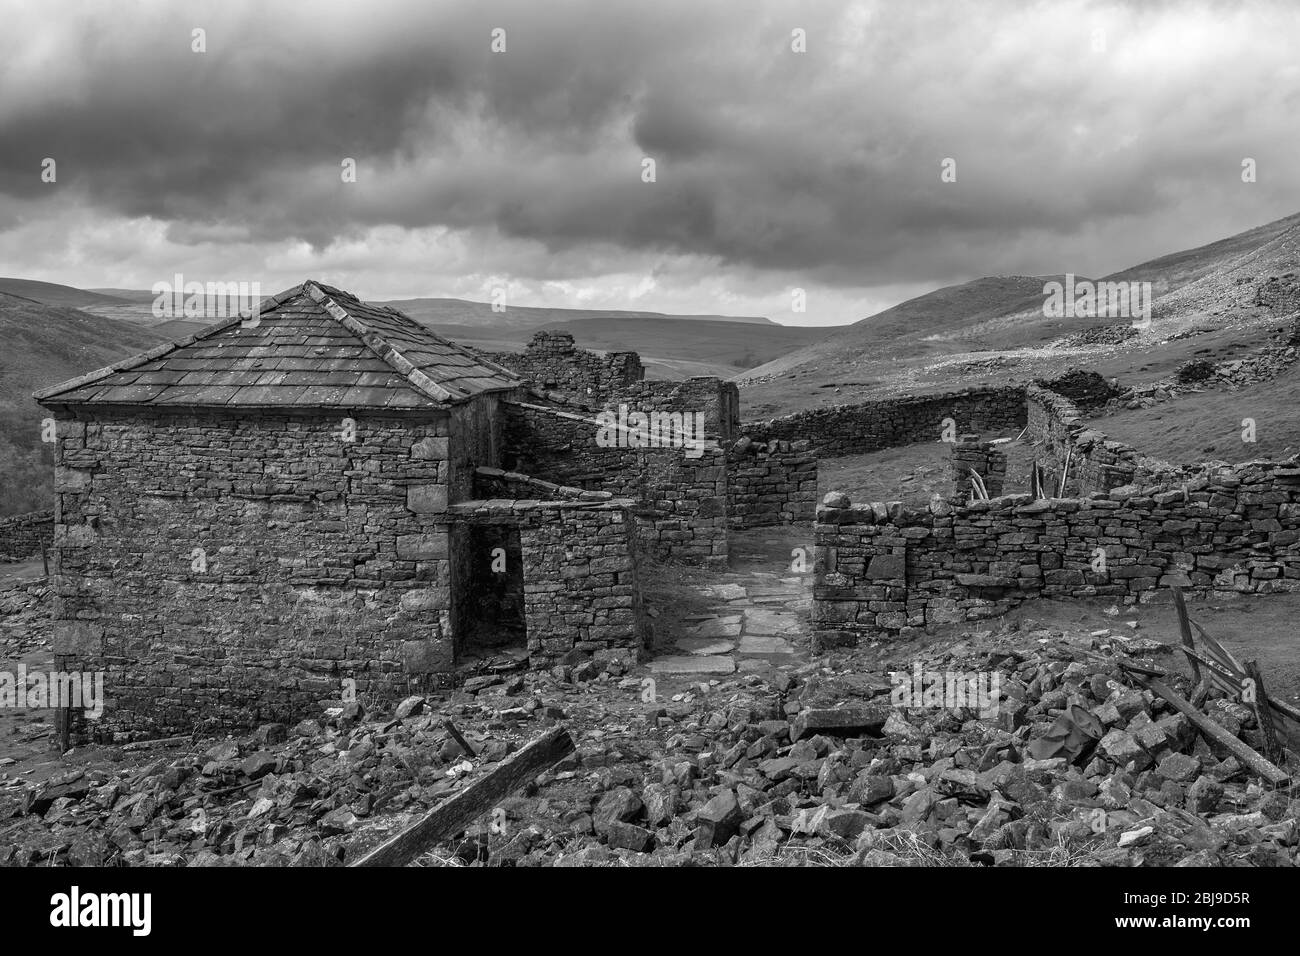 The ruins of Crackpot Halll near Keld, Swaledale, North Yorkshire, England, UK.  Black and white version Stock Photo